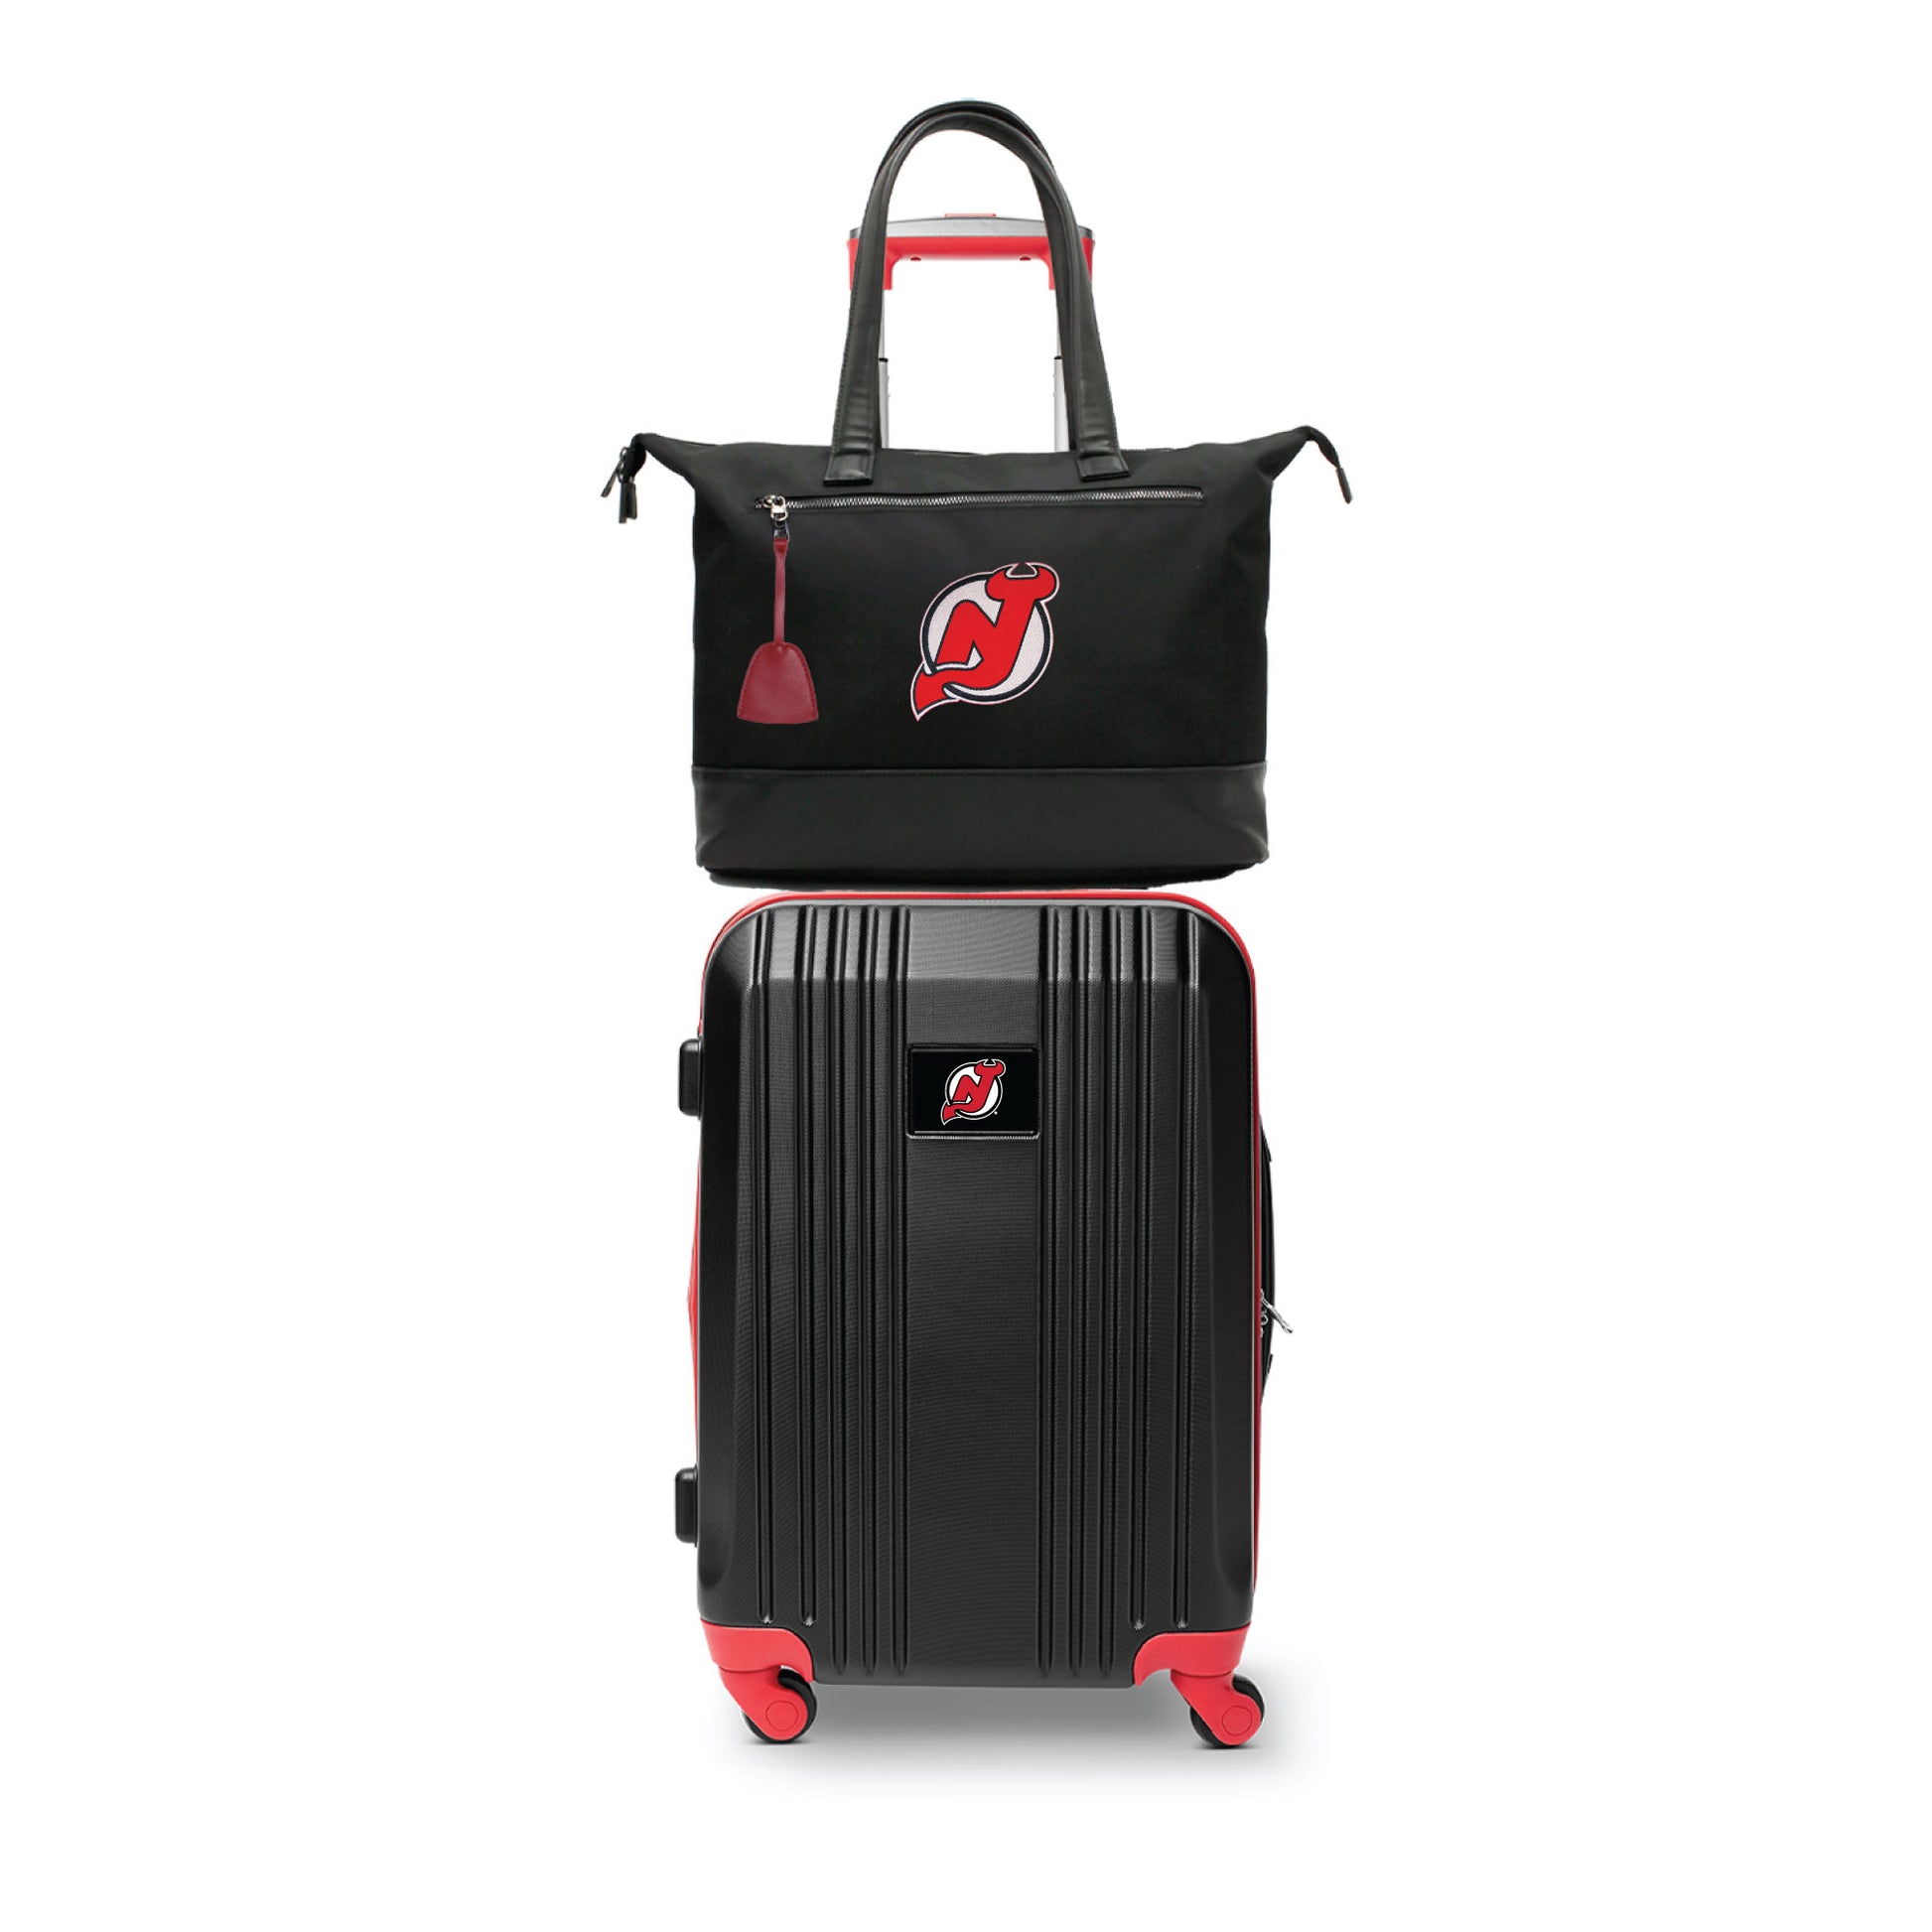 New Jersey Devils Premium Laptop Tote Bag and Luggage Set